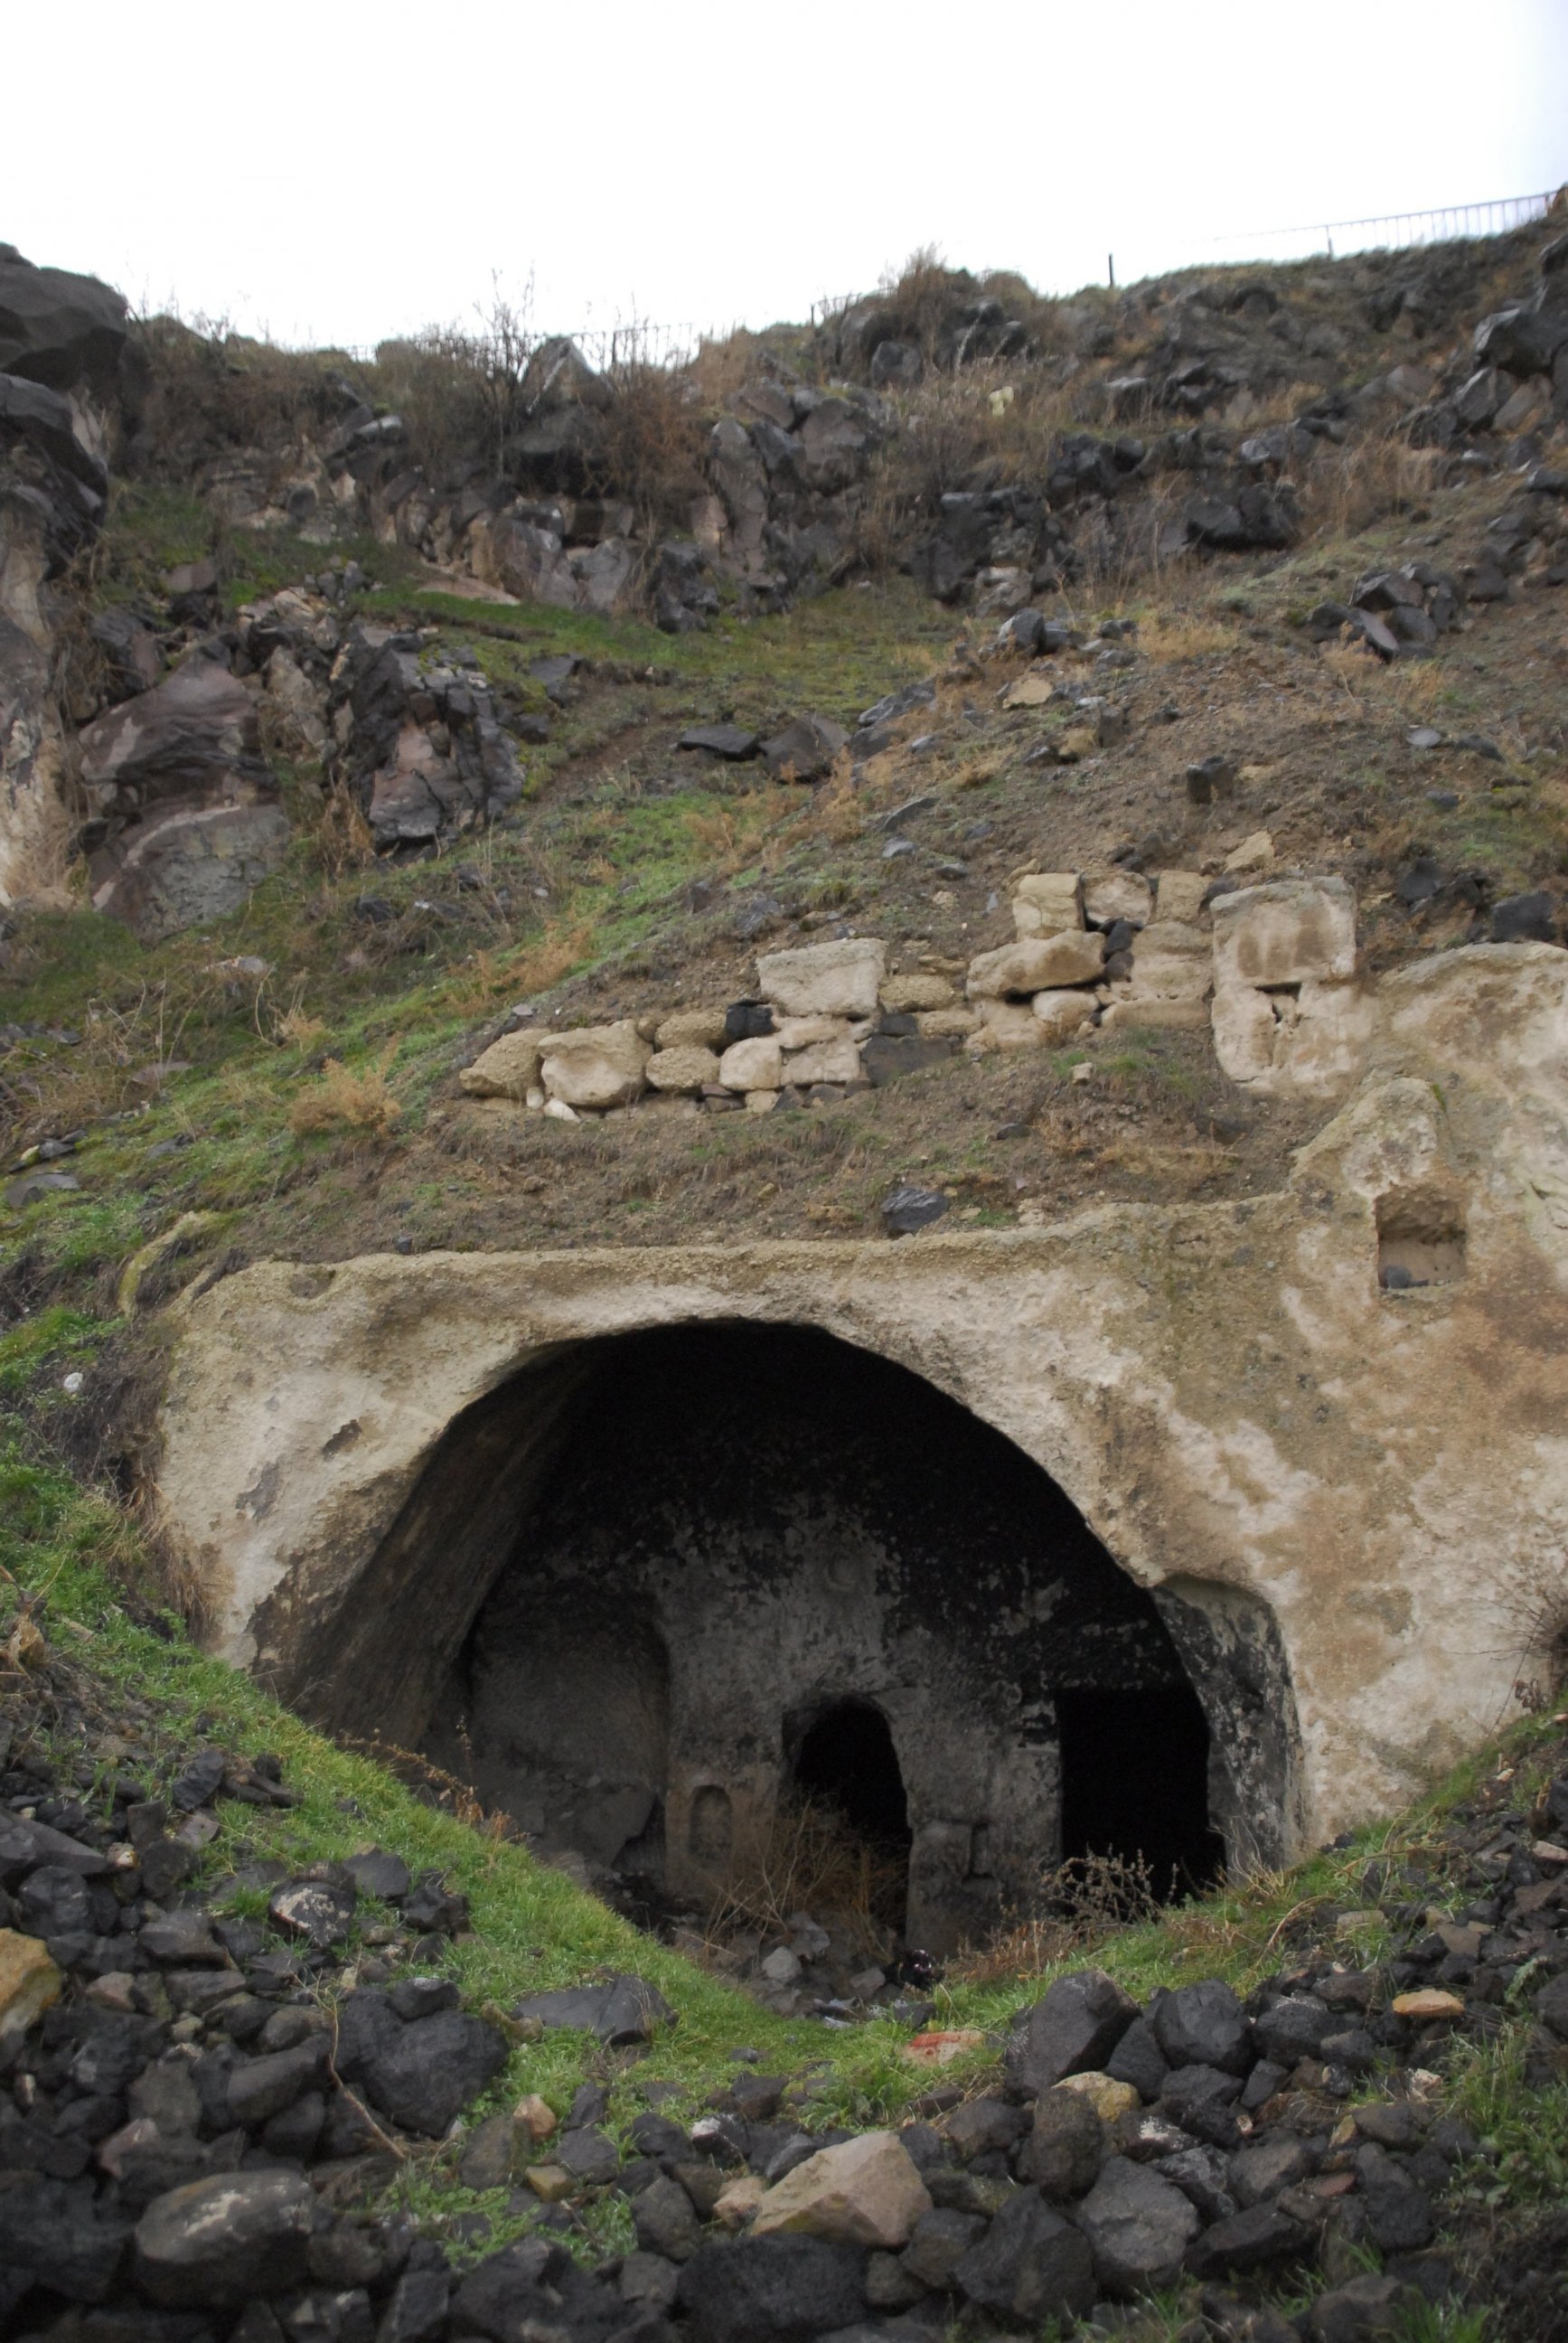 PHOTO: A view of the underground city newly discovered in Turkey's Central Anatolian province of Nevsehir is seen in this Dec. 28, 2014 file photo.